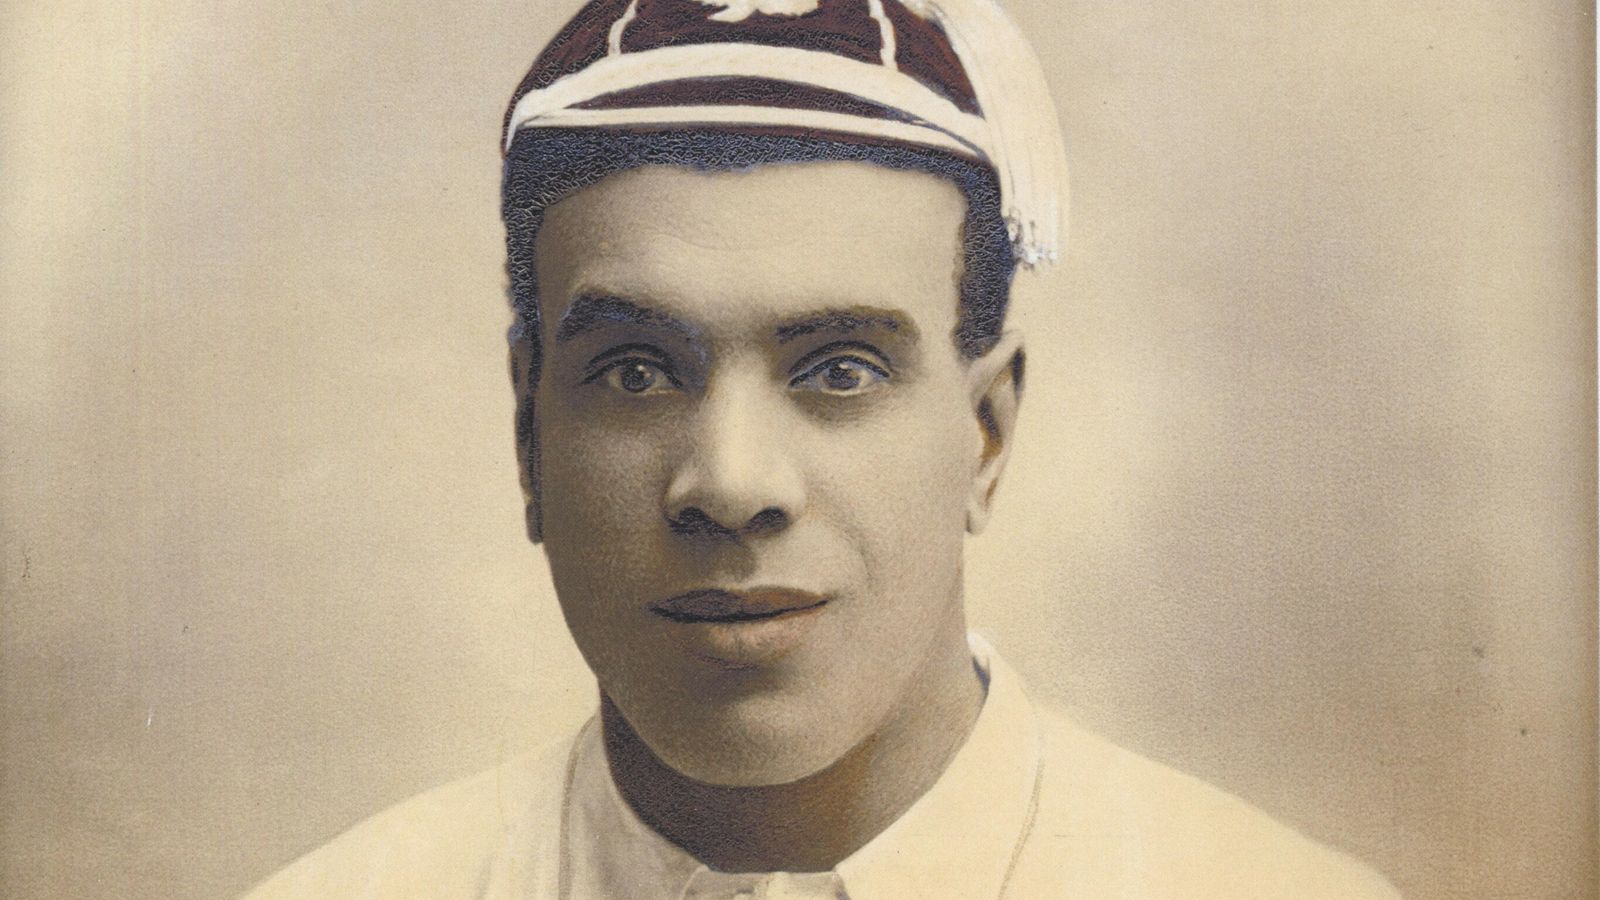 James ‘Jimmy’ Peters: The tragic and turbulent story of England’s first black rugby player